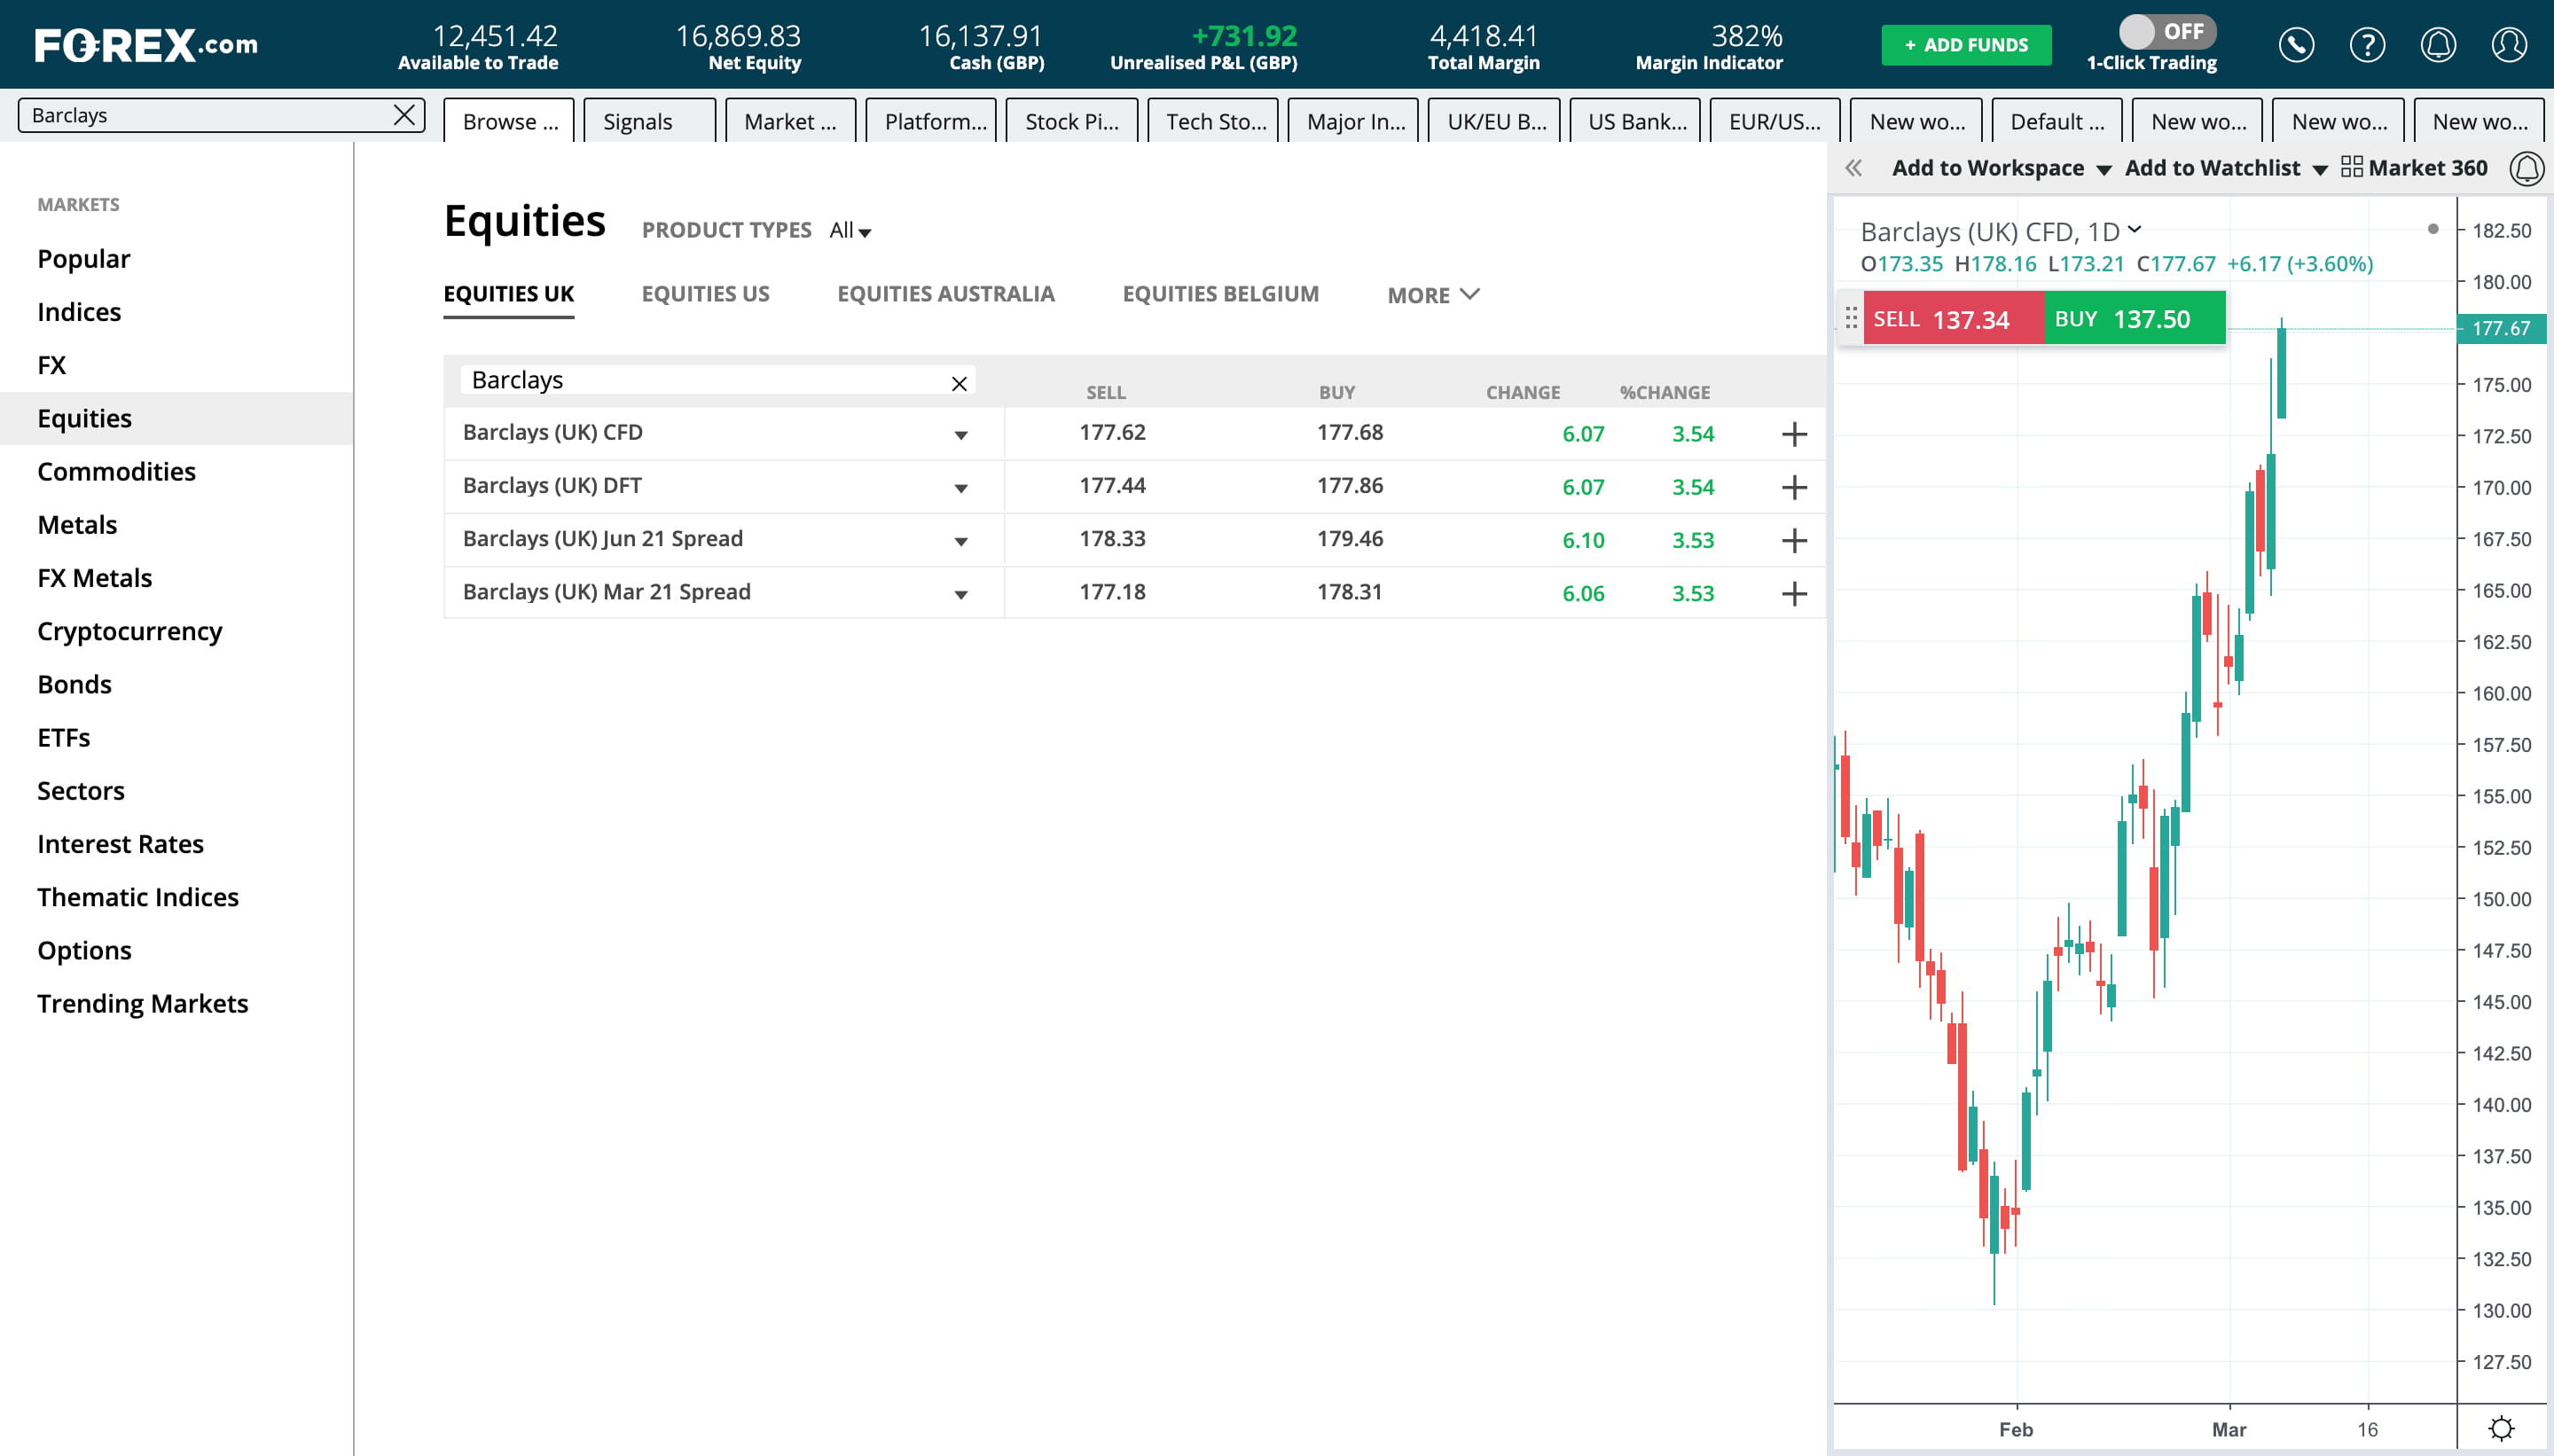 Trading screen showing a table and chart tracking performance of Barclays UK CFD